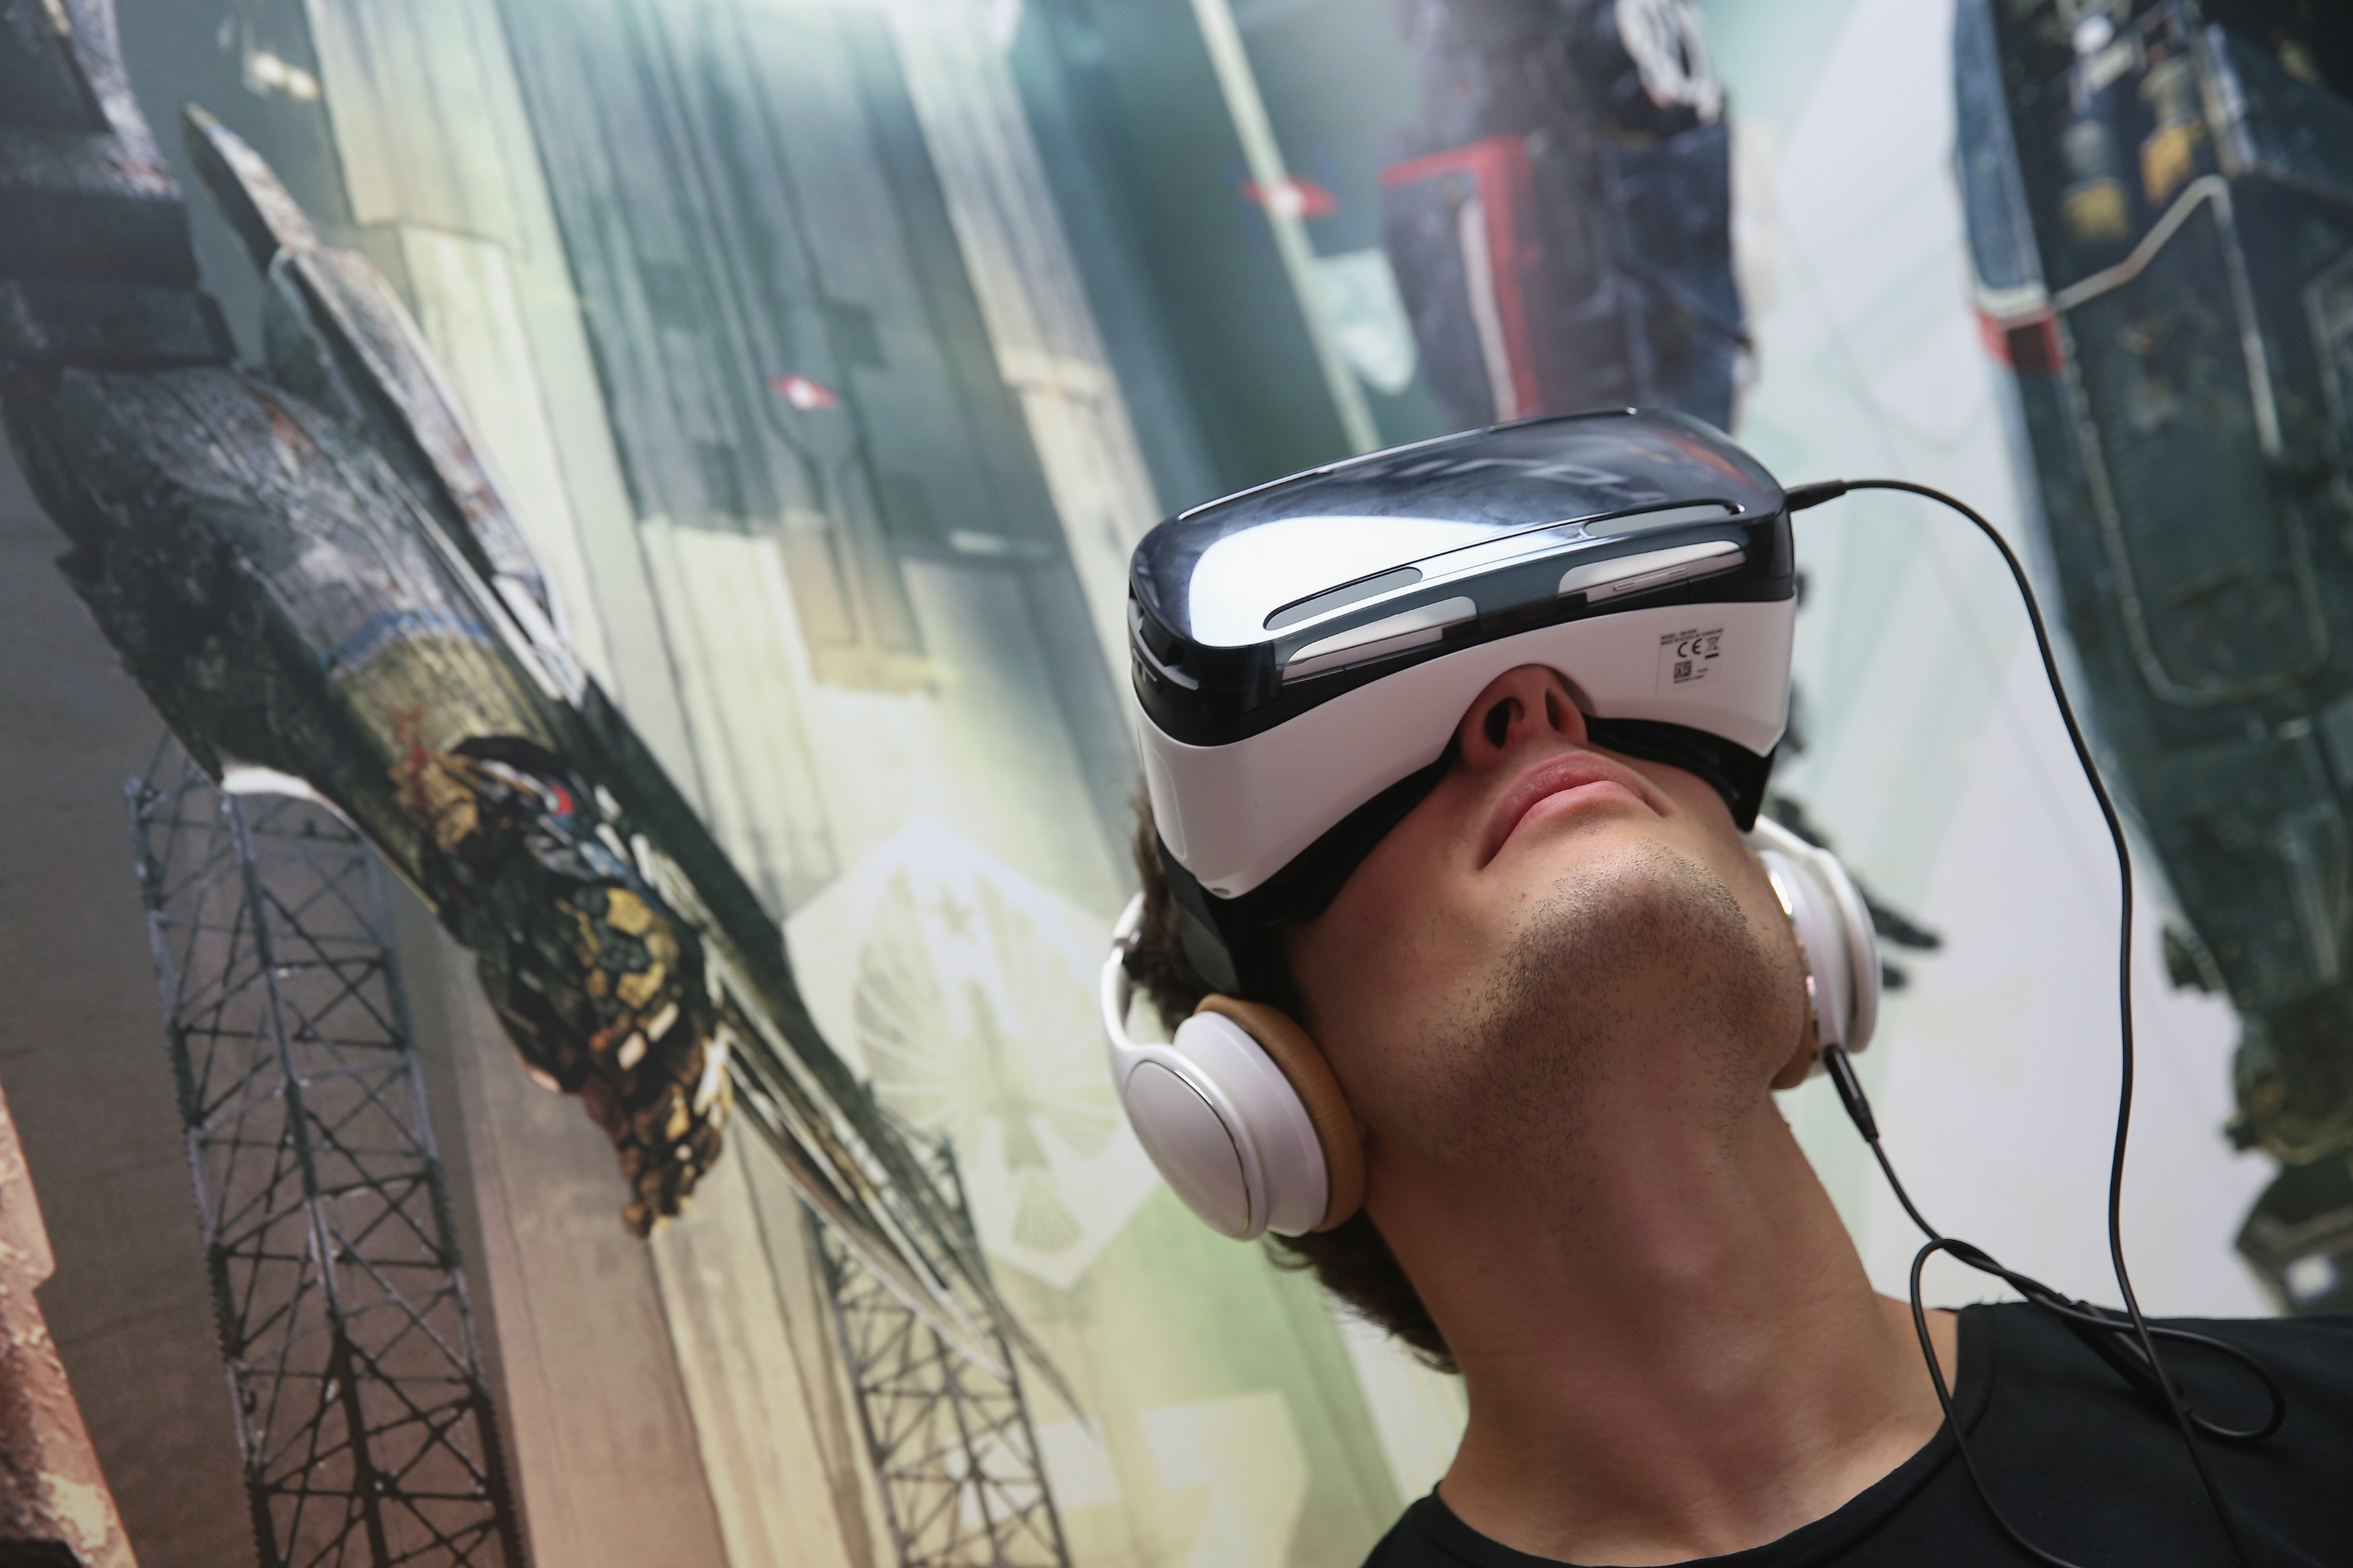 A visitor tries out Gear VR virtual reality goggles amd headphones at the Samsung stand at the 2014 IFA home electronics and appliances trade fair on September 5, 2014 in Berlin. (Sean Gallup&mdash;Getty Images)